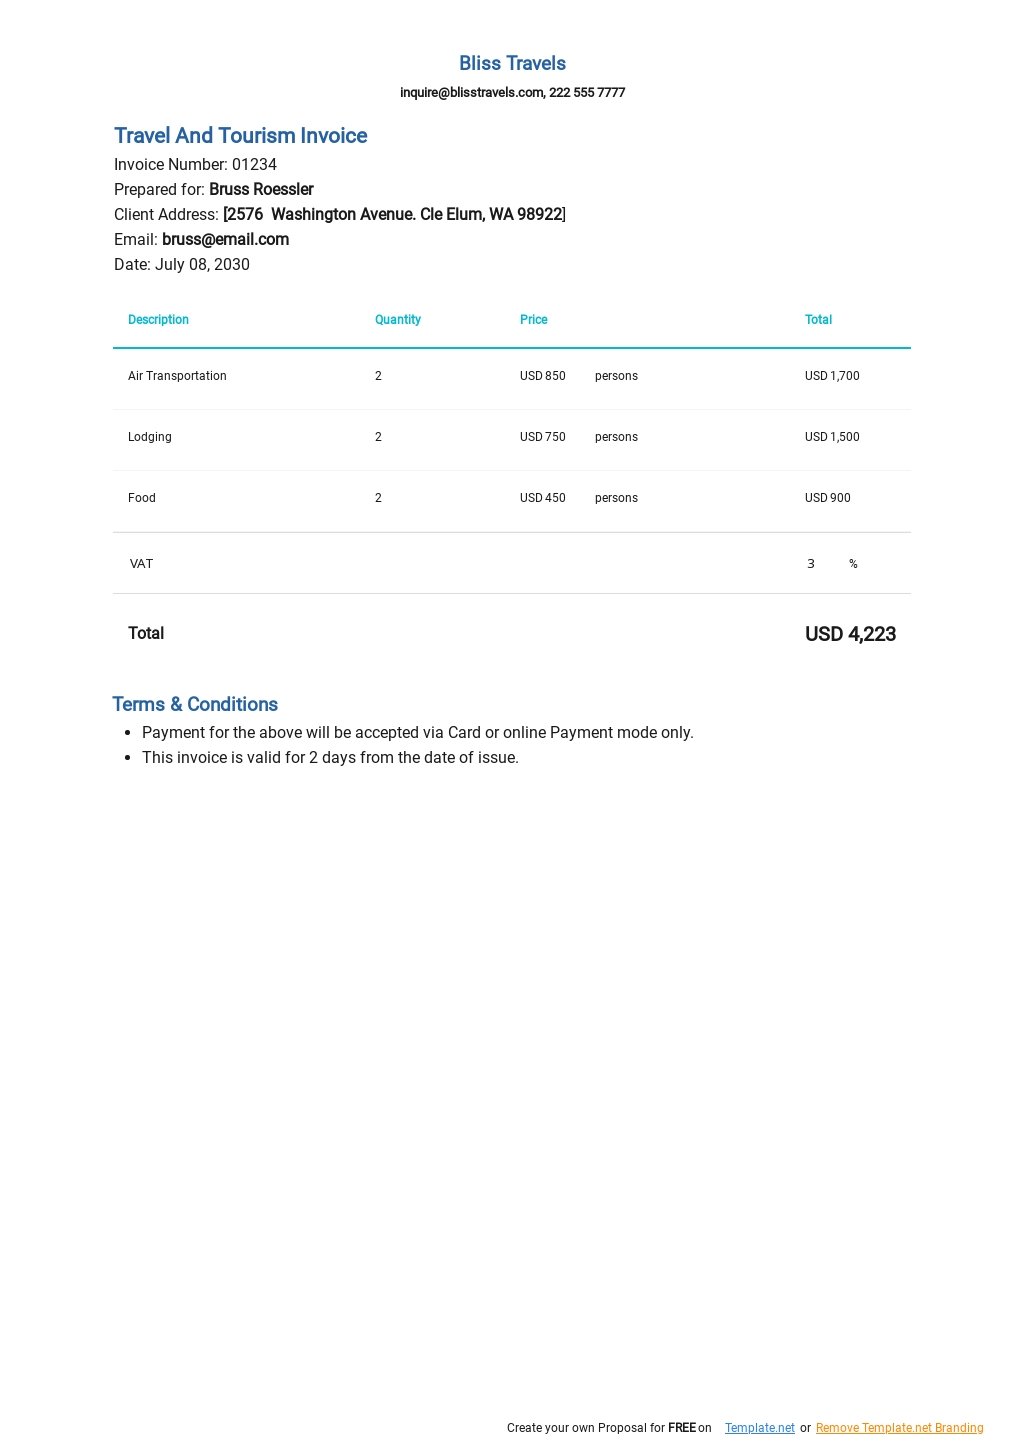 Travel And Tourism Invoice Template.jpe